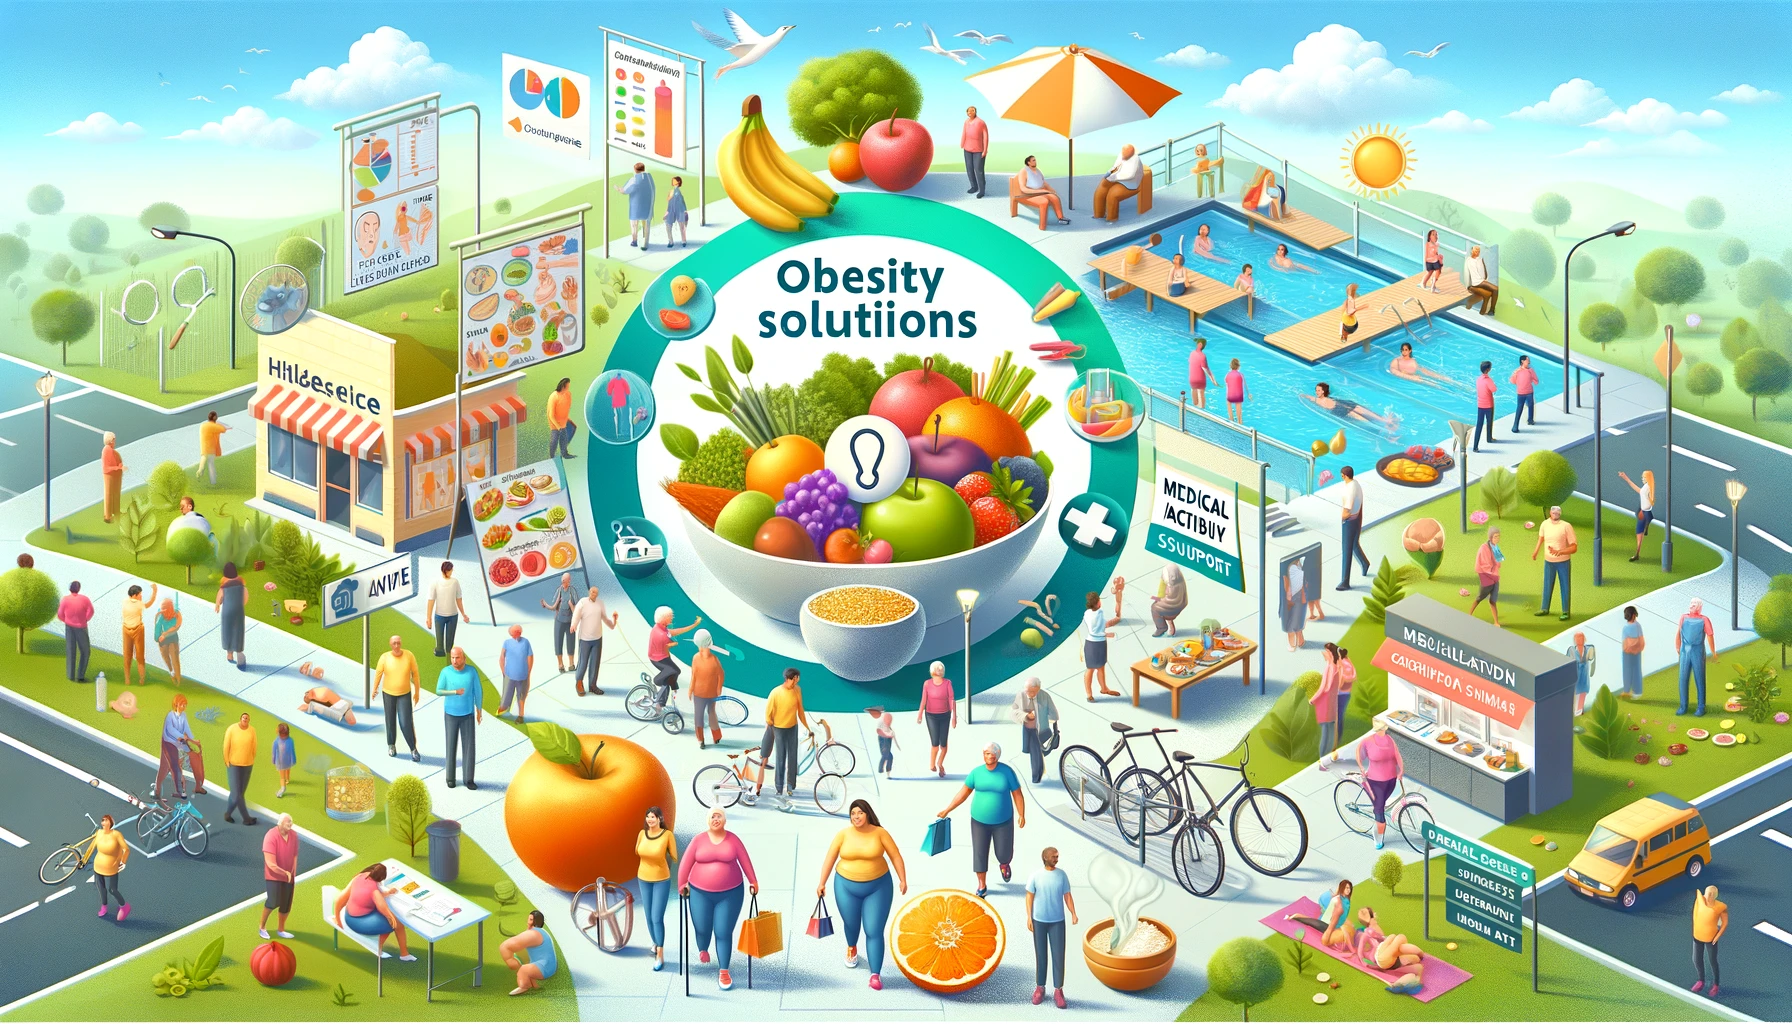 : Diverse community engaging in healthy eating and activities for obesity solutions on Healthy Life - New Start blog.